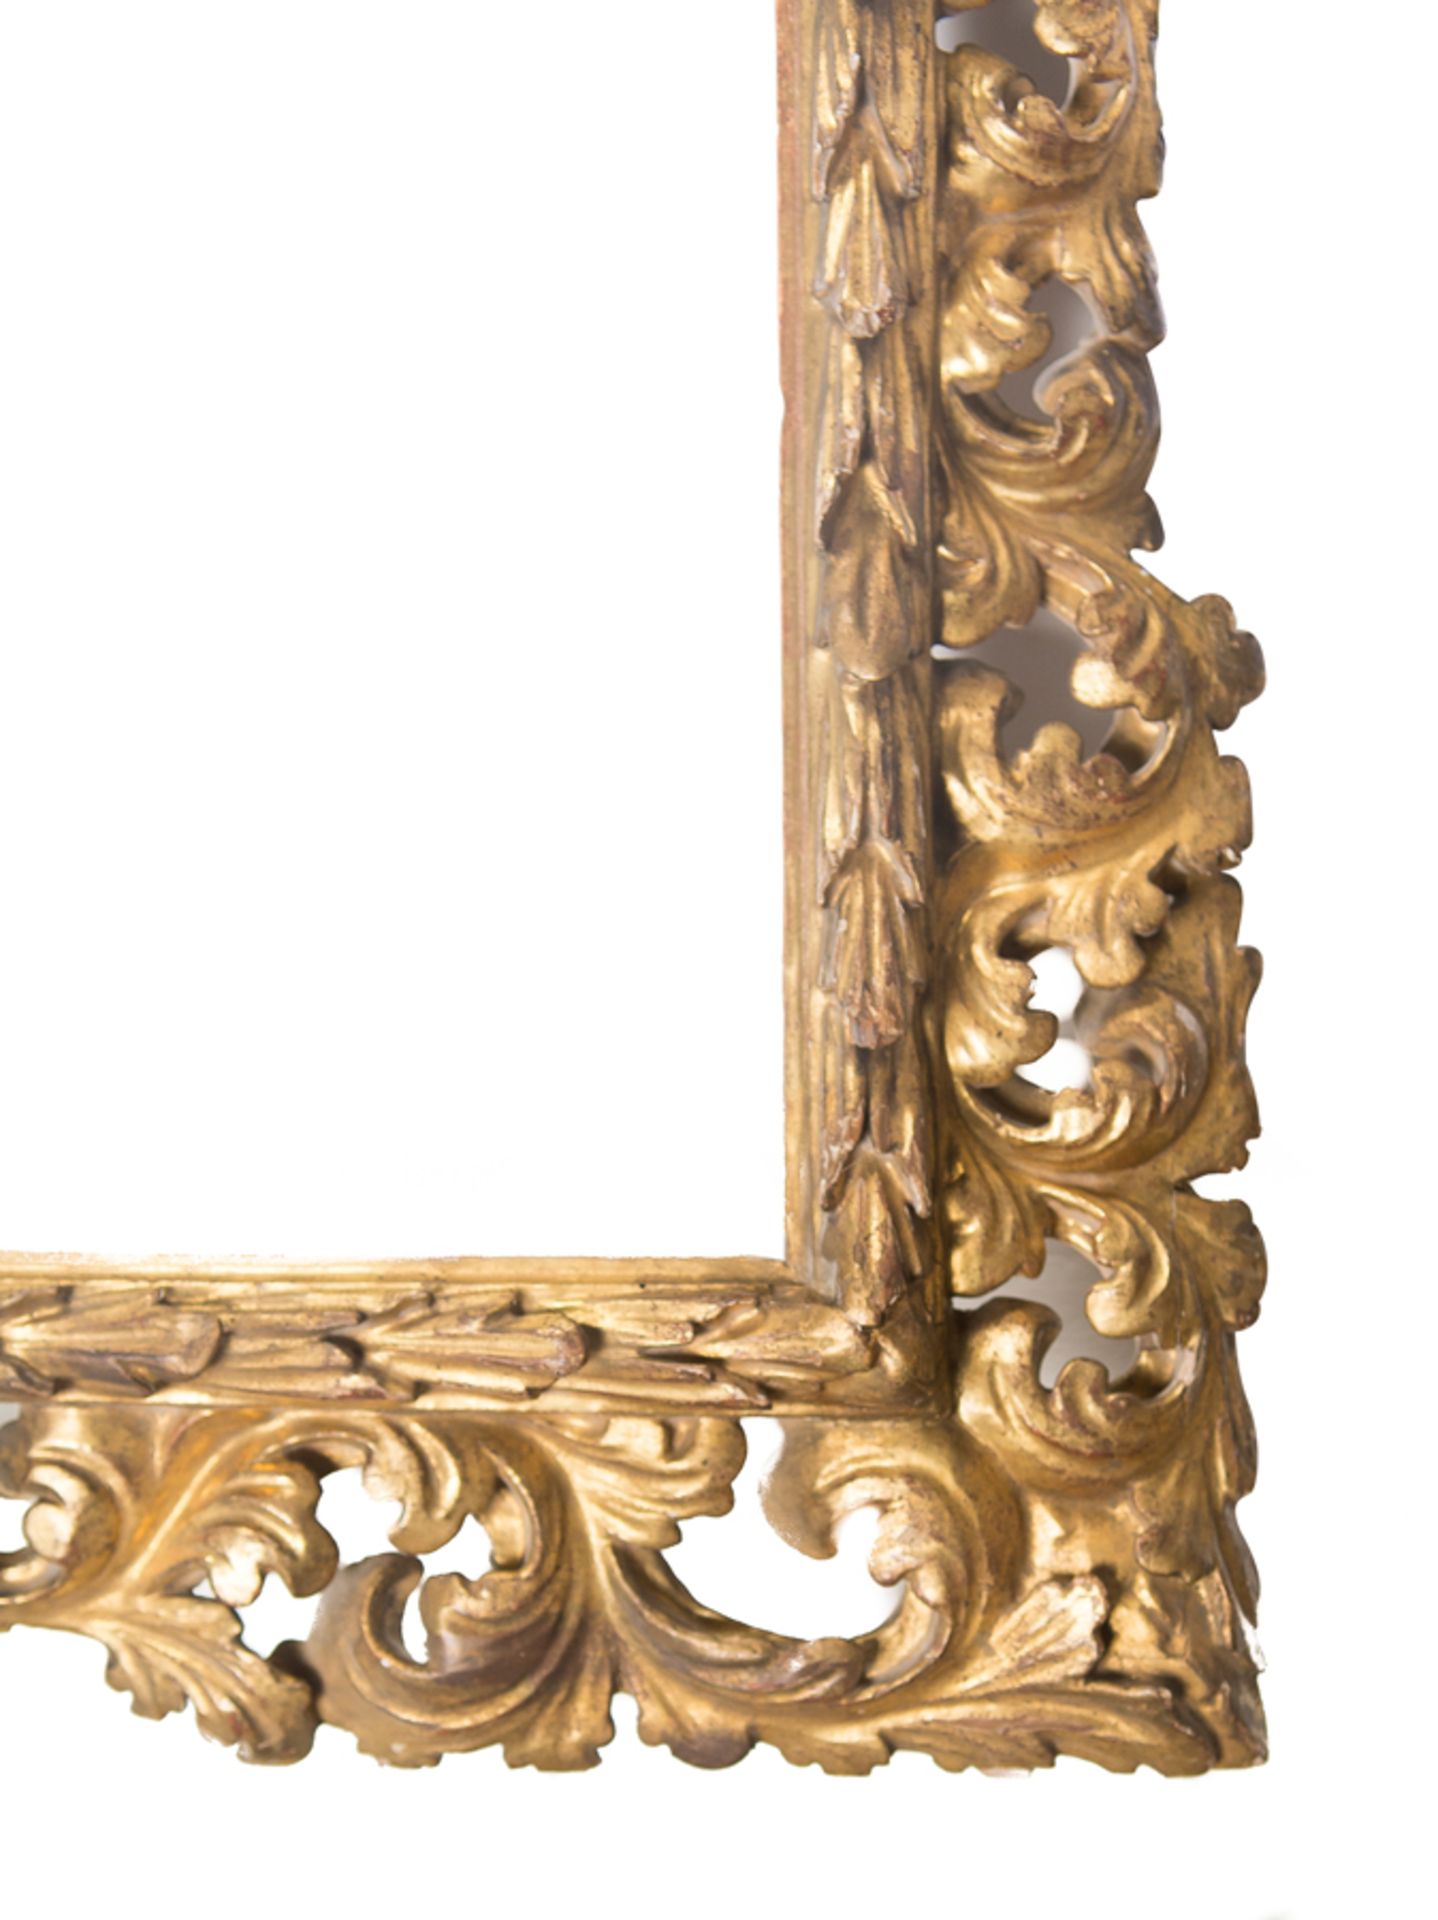 Carved and gilded wooden frame. Italian work. 17th - 18th century. - Bild 2 aus 4